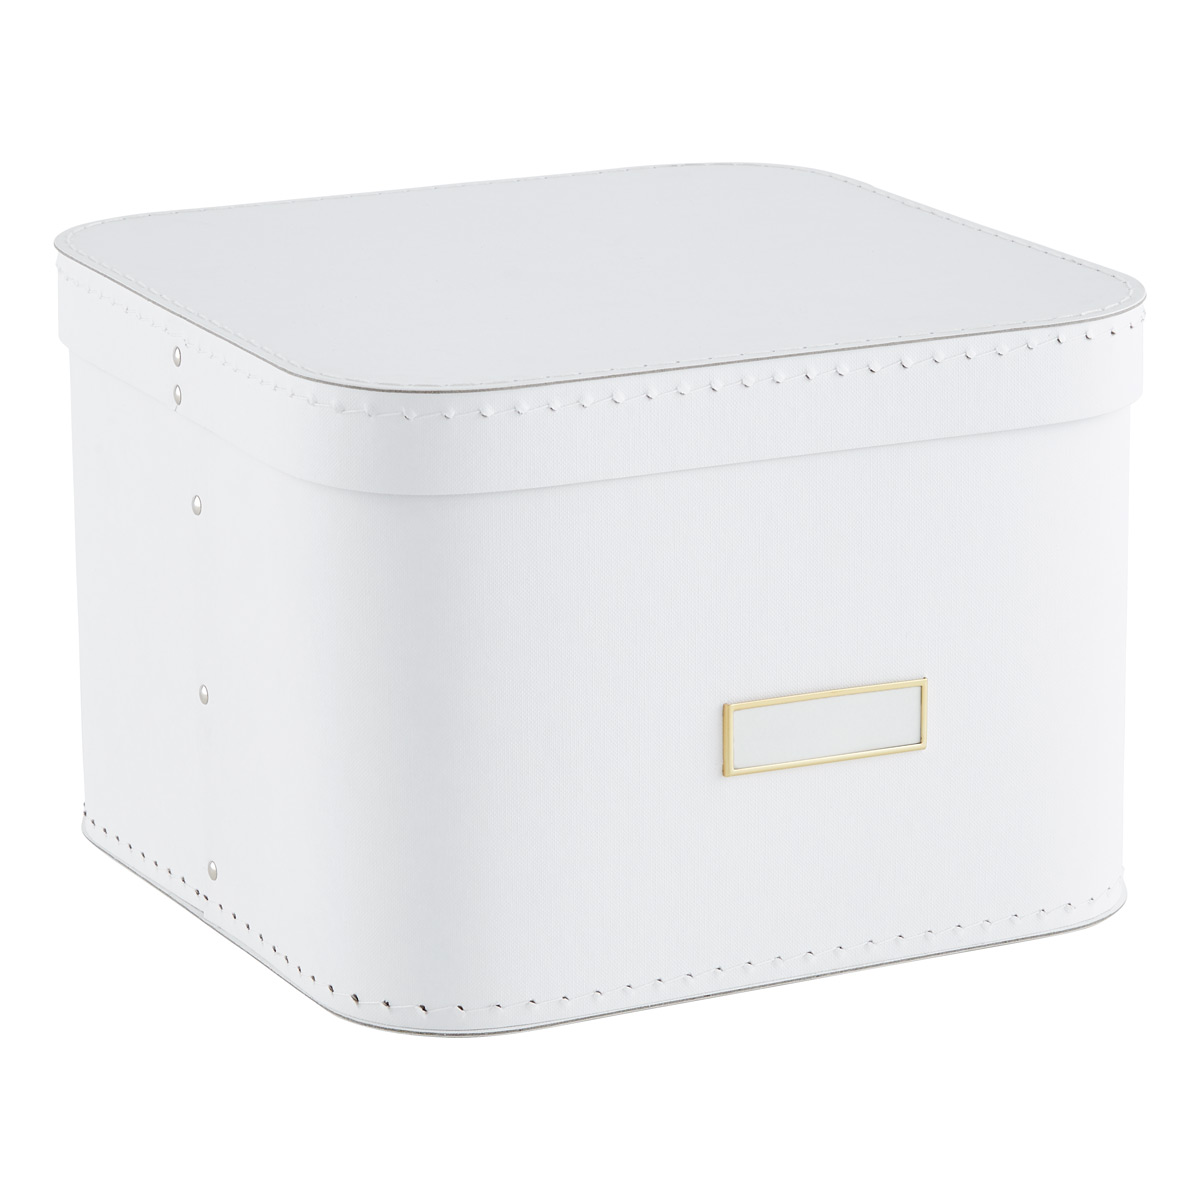 Oskar Storage Box with Lid | The Container Store